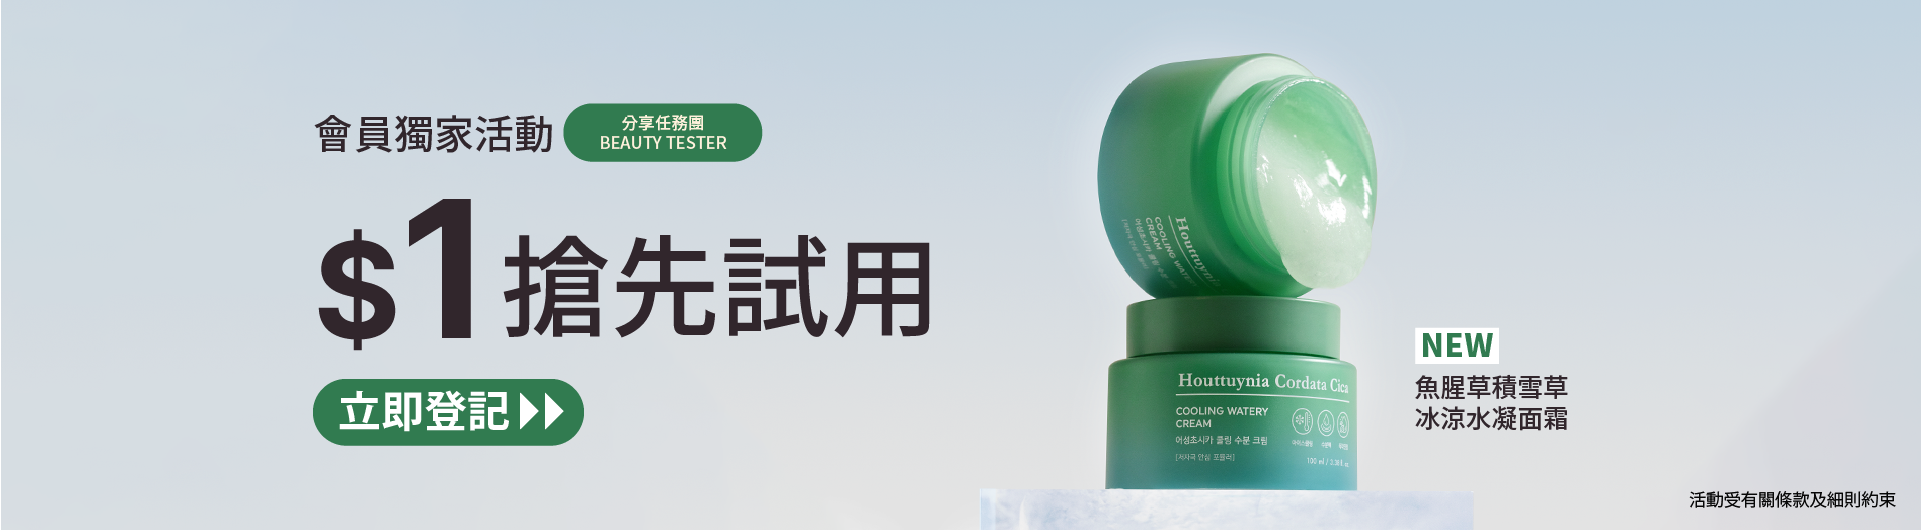 [Registration Period has closed] BEAUTY TESTER EVENT- Houttuynia Cordata Cica Cooling Watery Cream